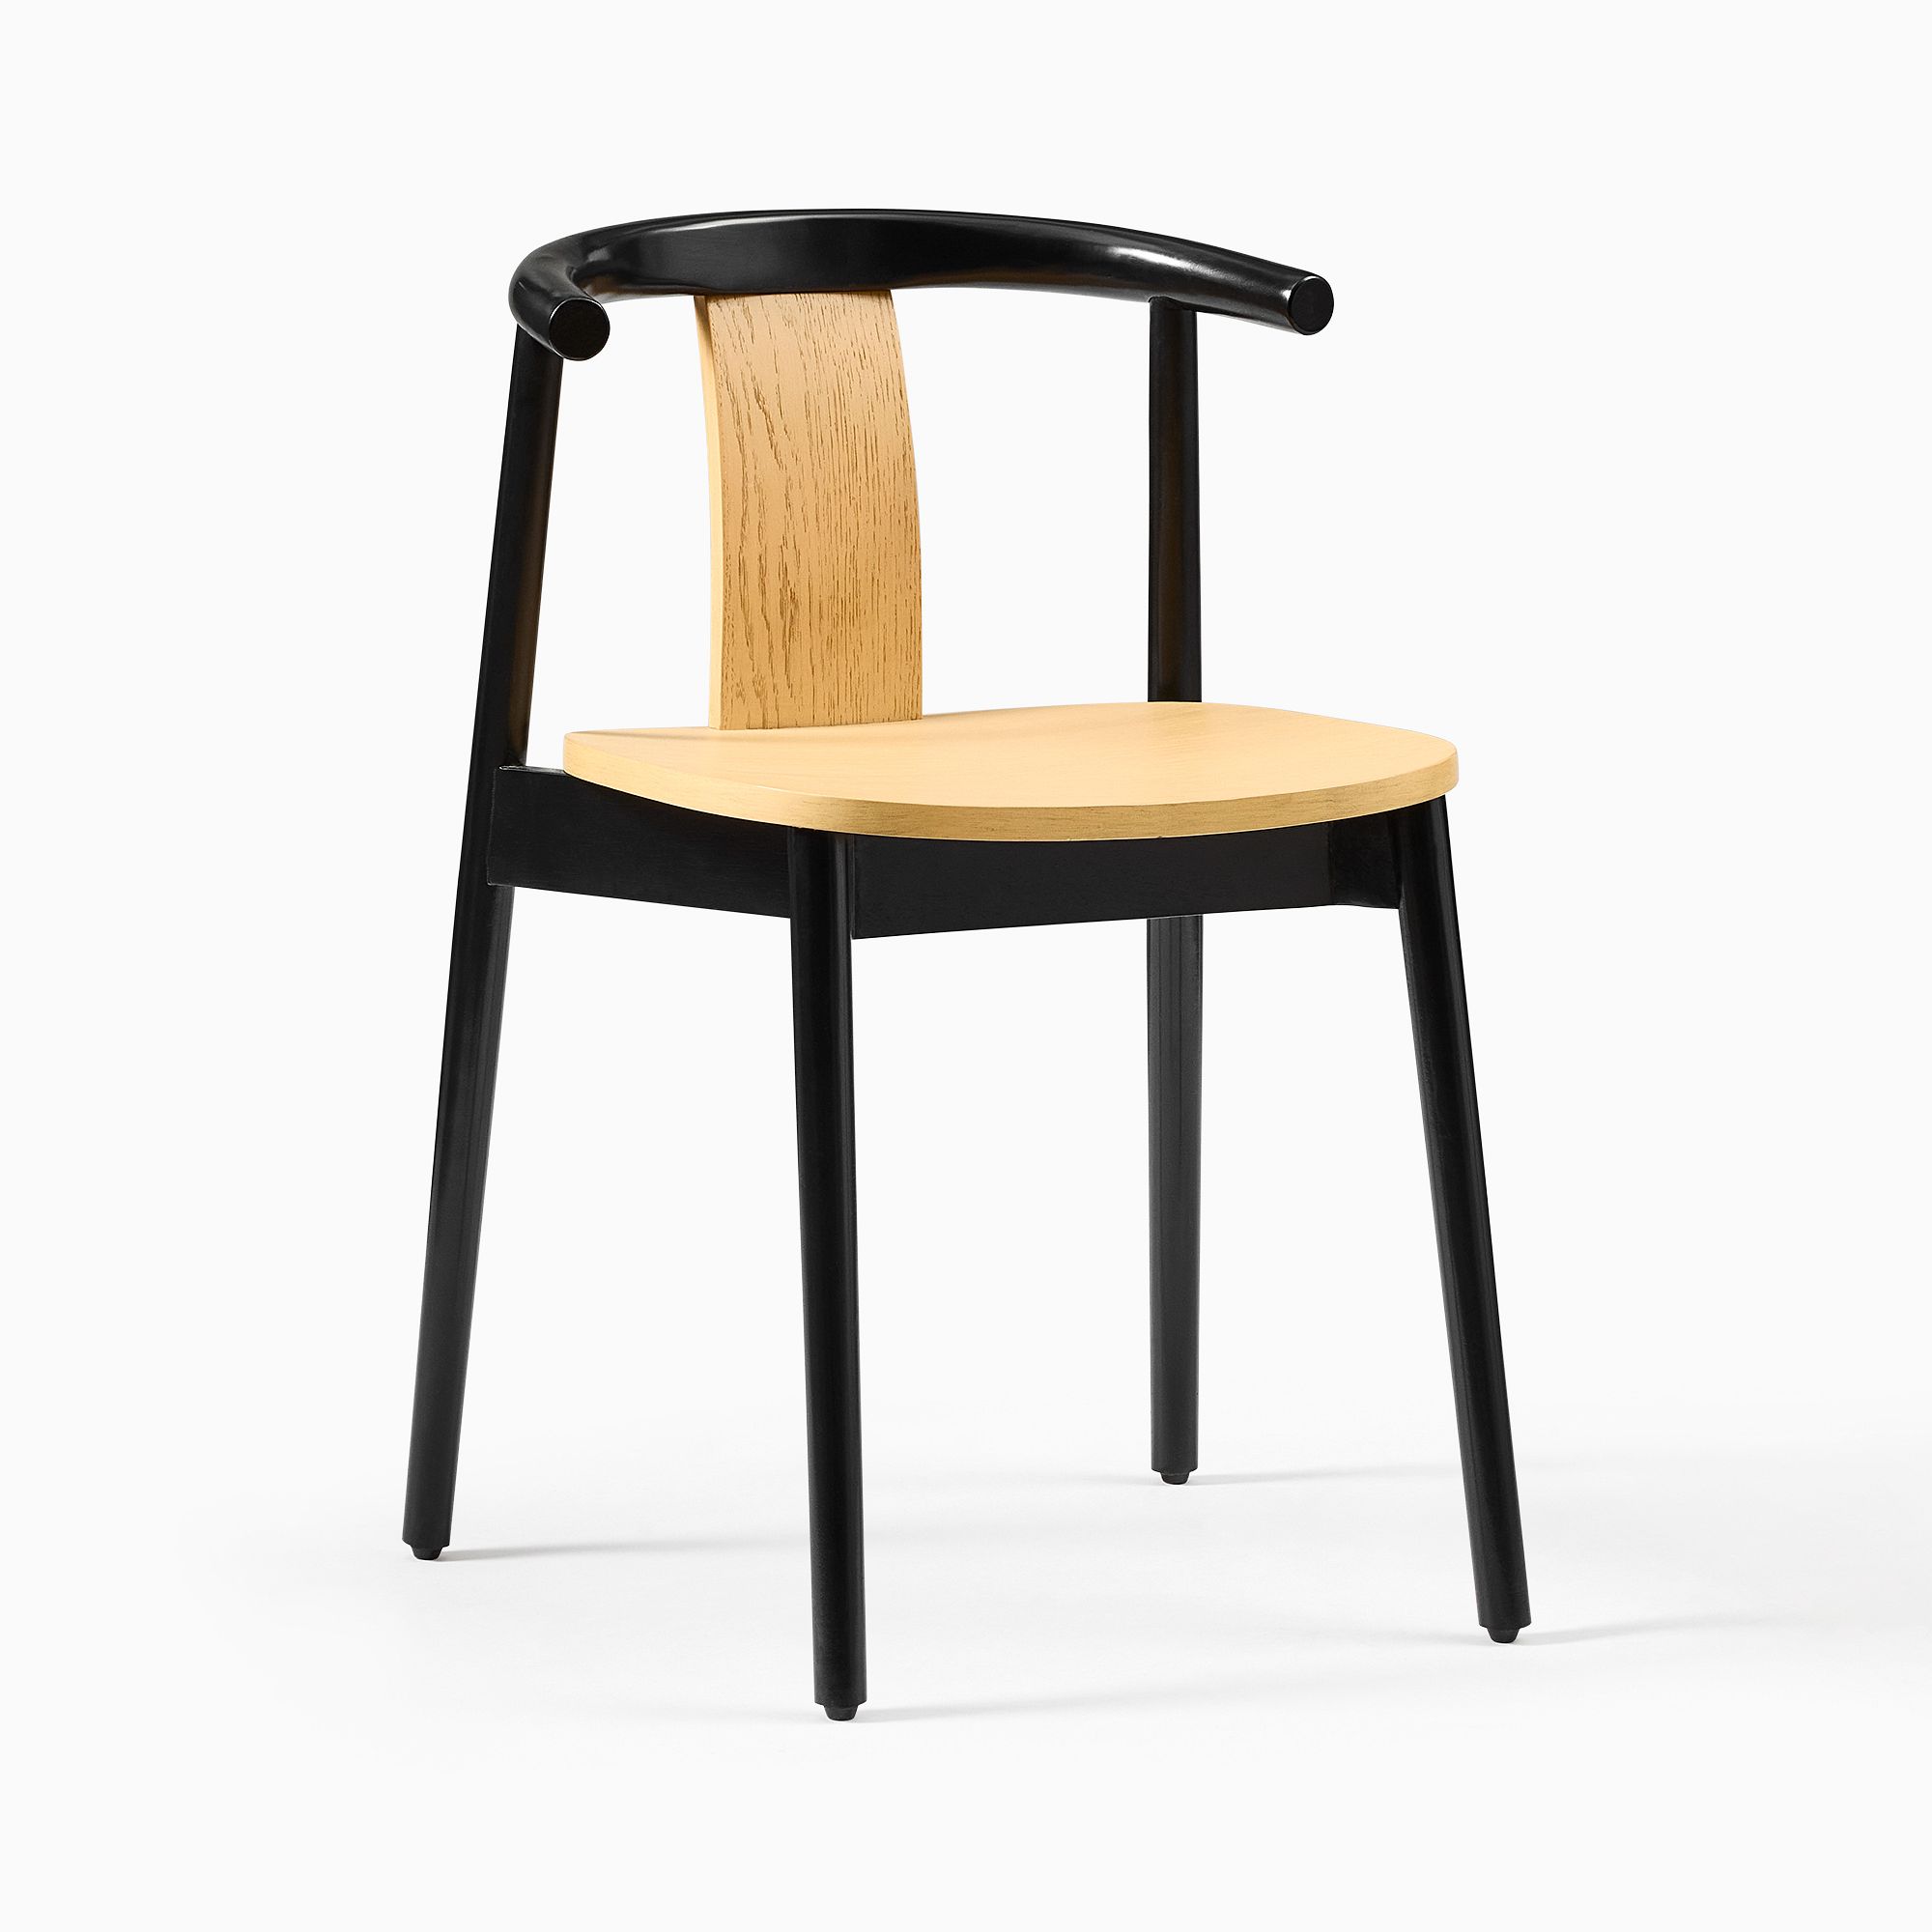 Wingate Dining Chair